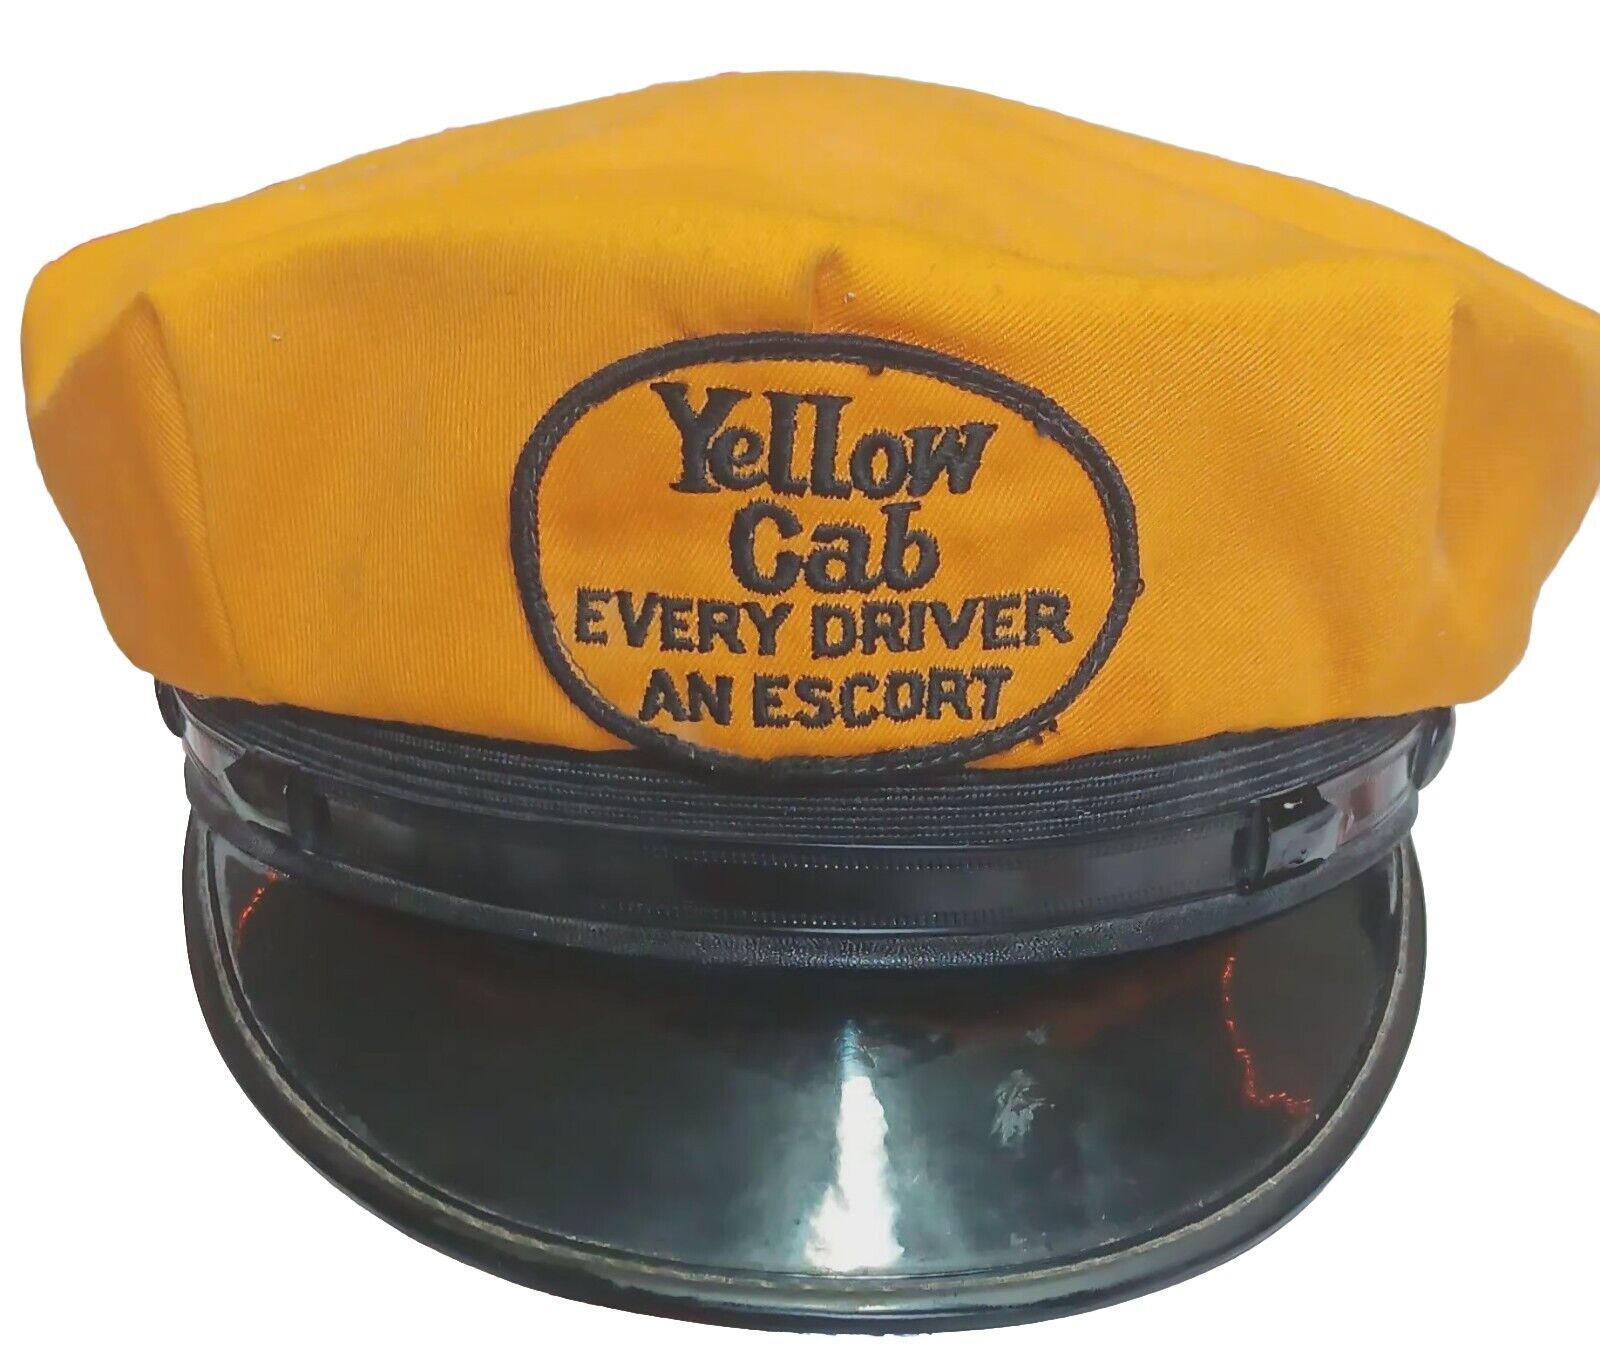 Vintage Yellow Taxi Cab Hat Every Driver An Excort 1940s -1950s